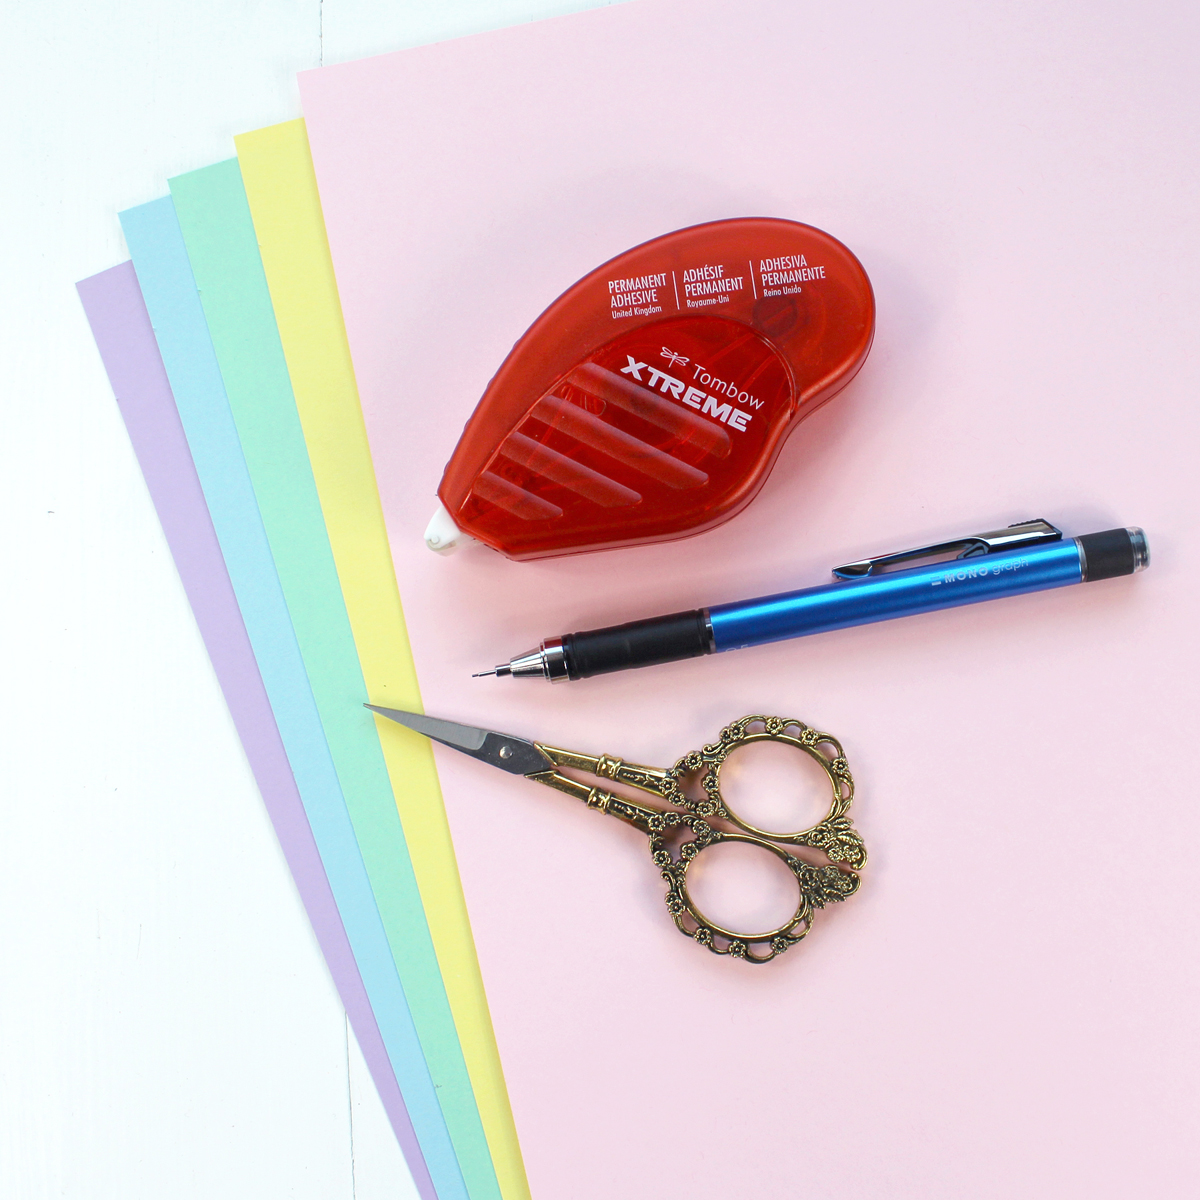 Colored pastel cardstock, scissors, mechanical pencil and Tombow Xtreme Adhesive roller